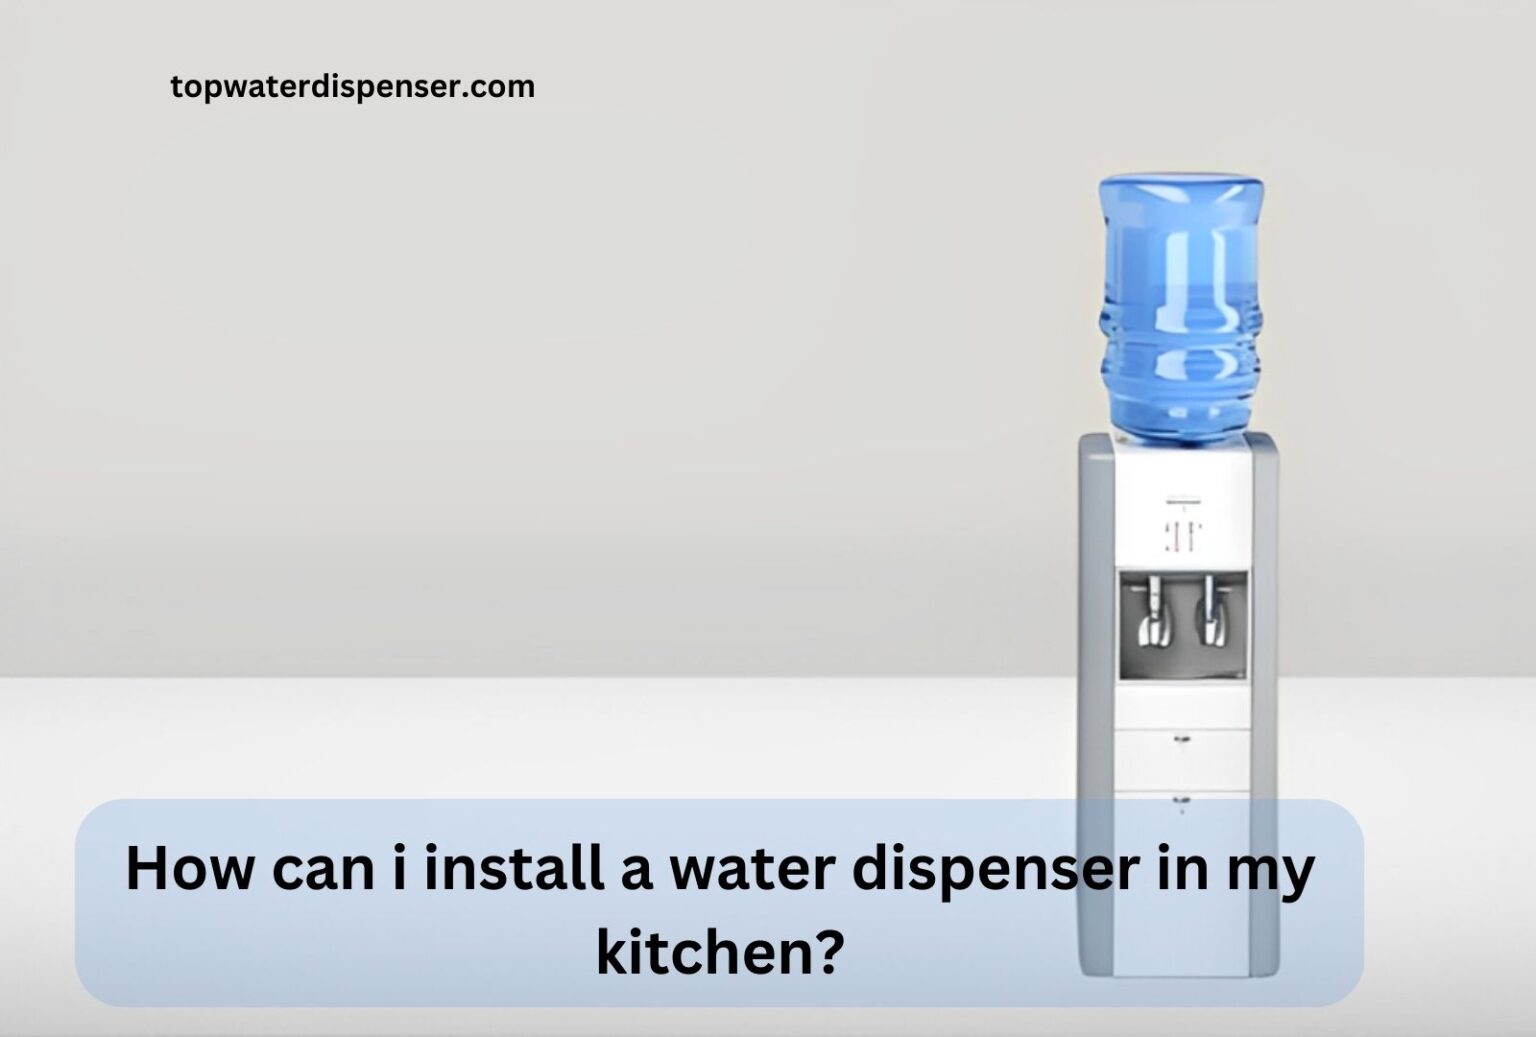 How can i install a water dispenser in my kitchen?